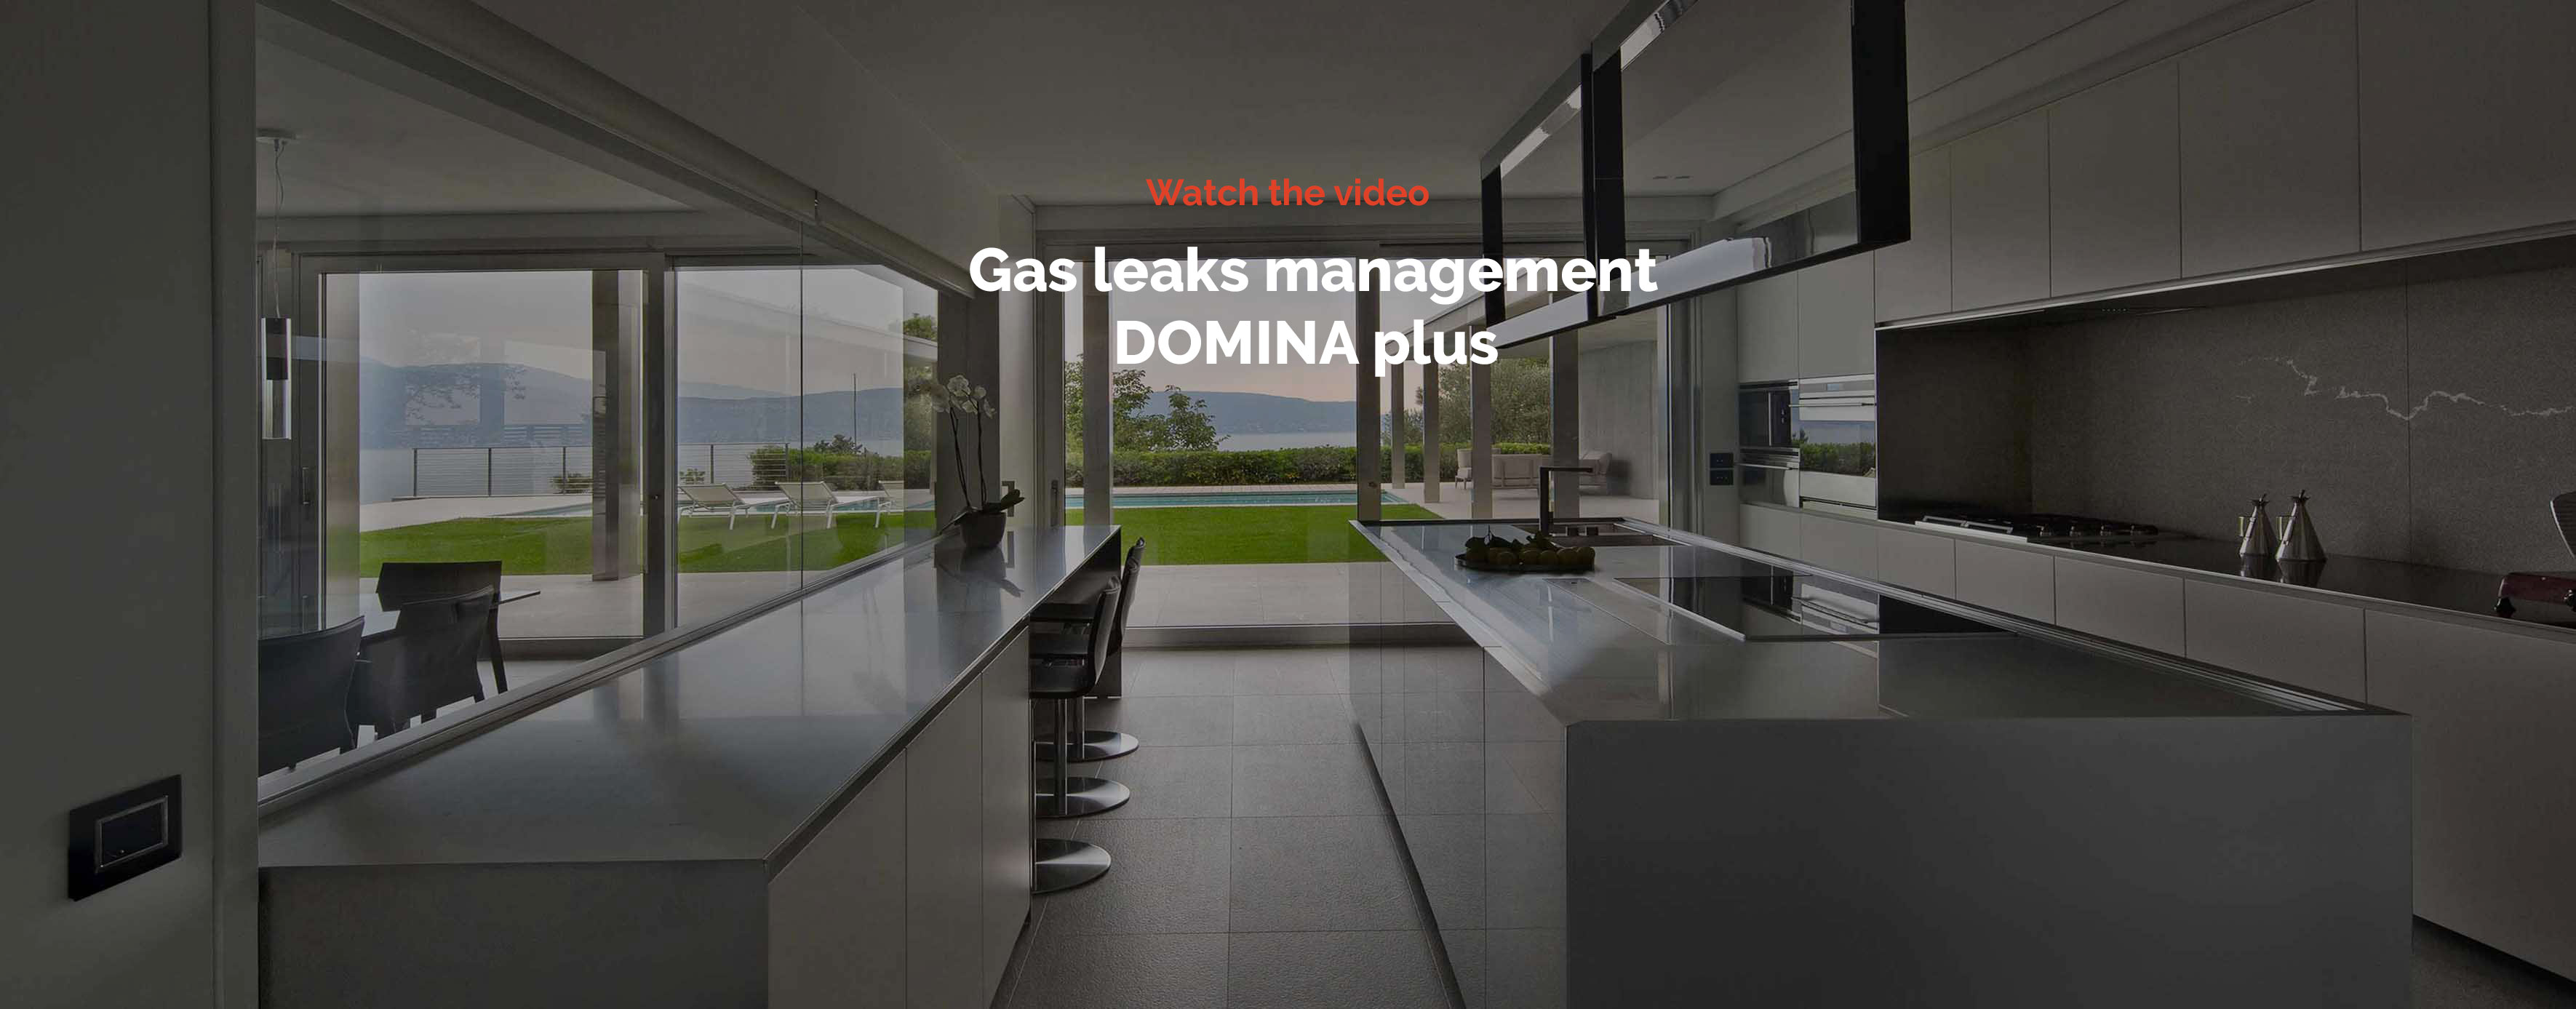 Home automation AVE DOMINA plus – Gas leaks video